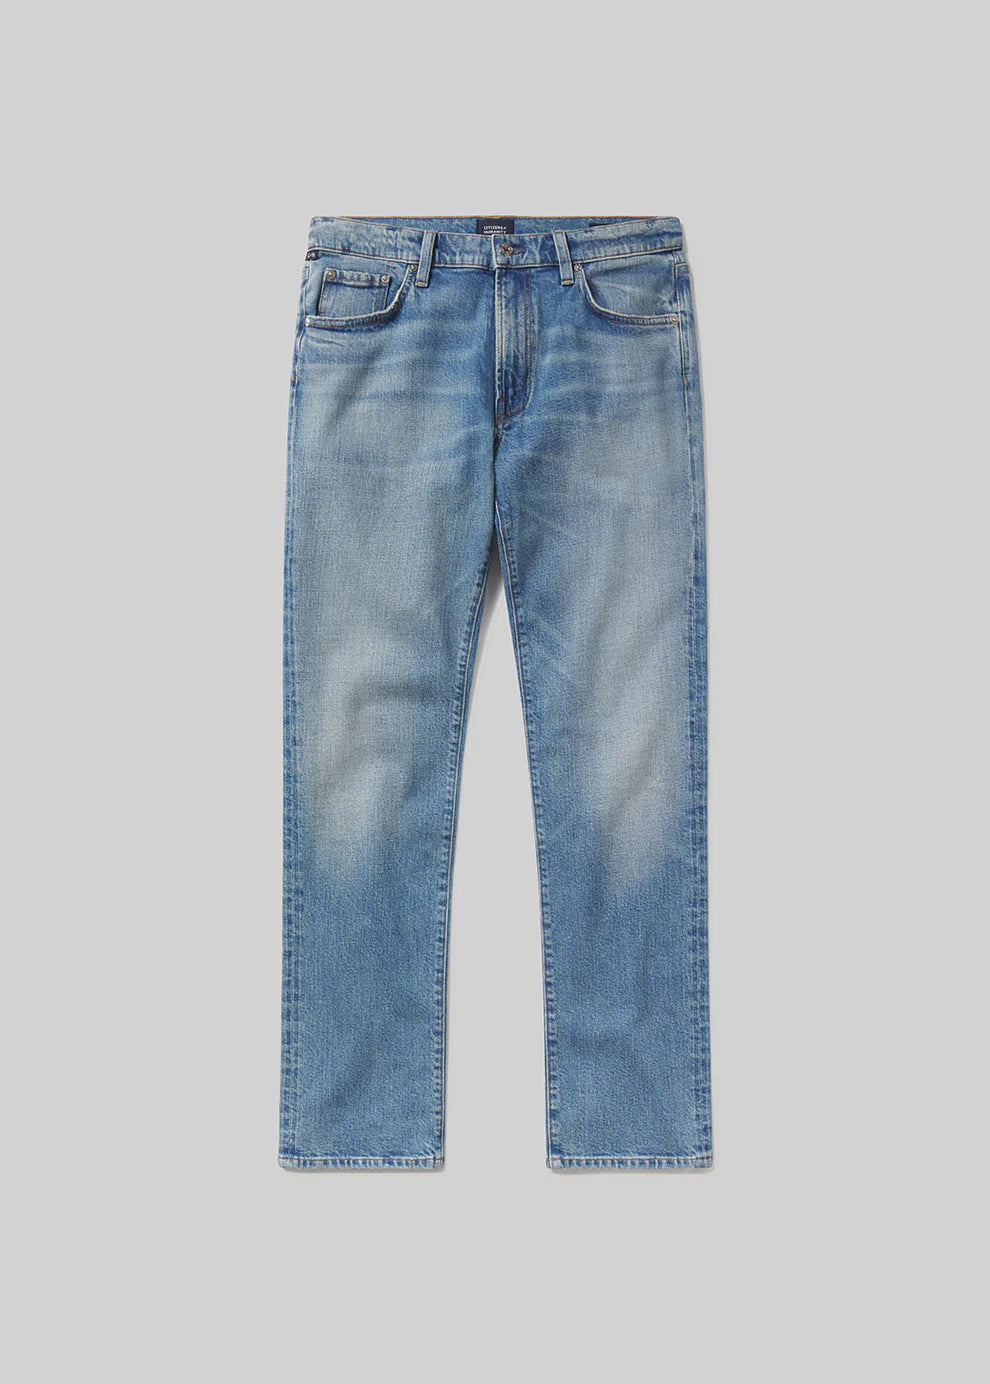 Citizens of Humanity Men's Gage Slim Straight Archive